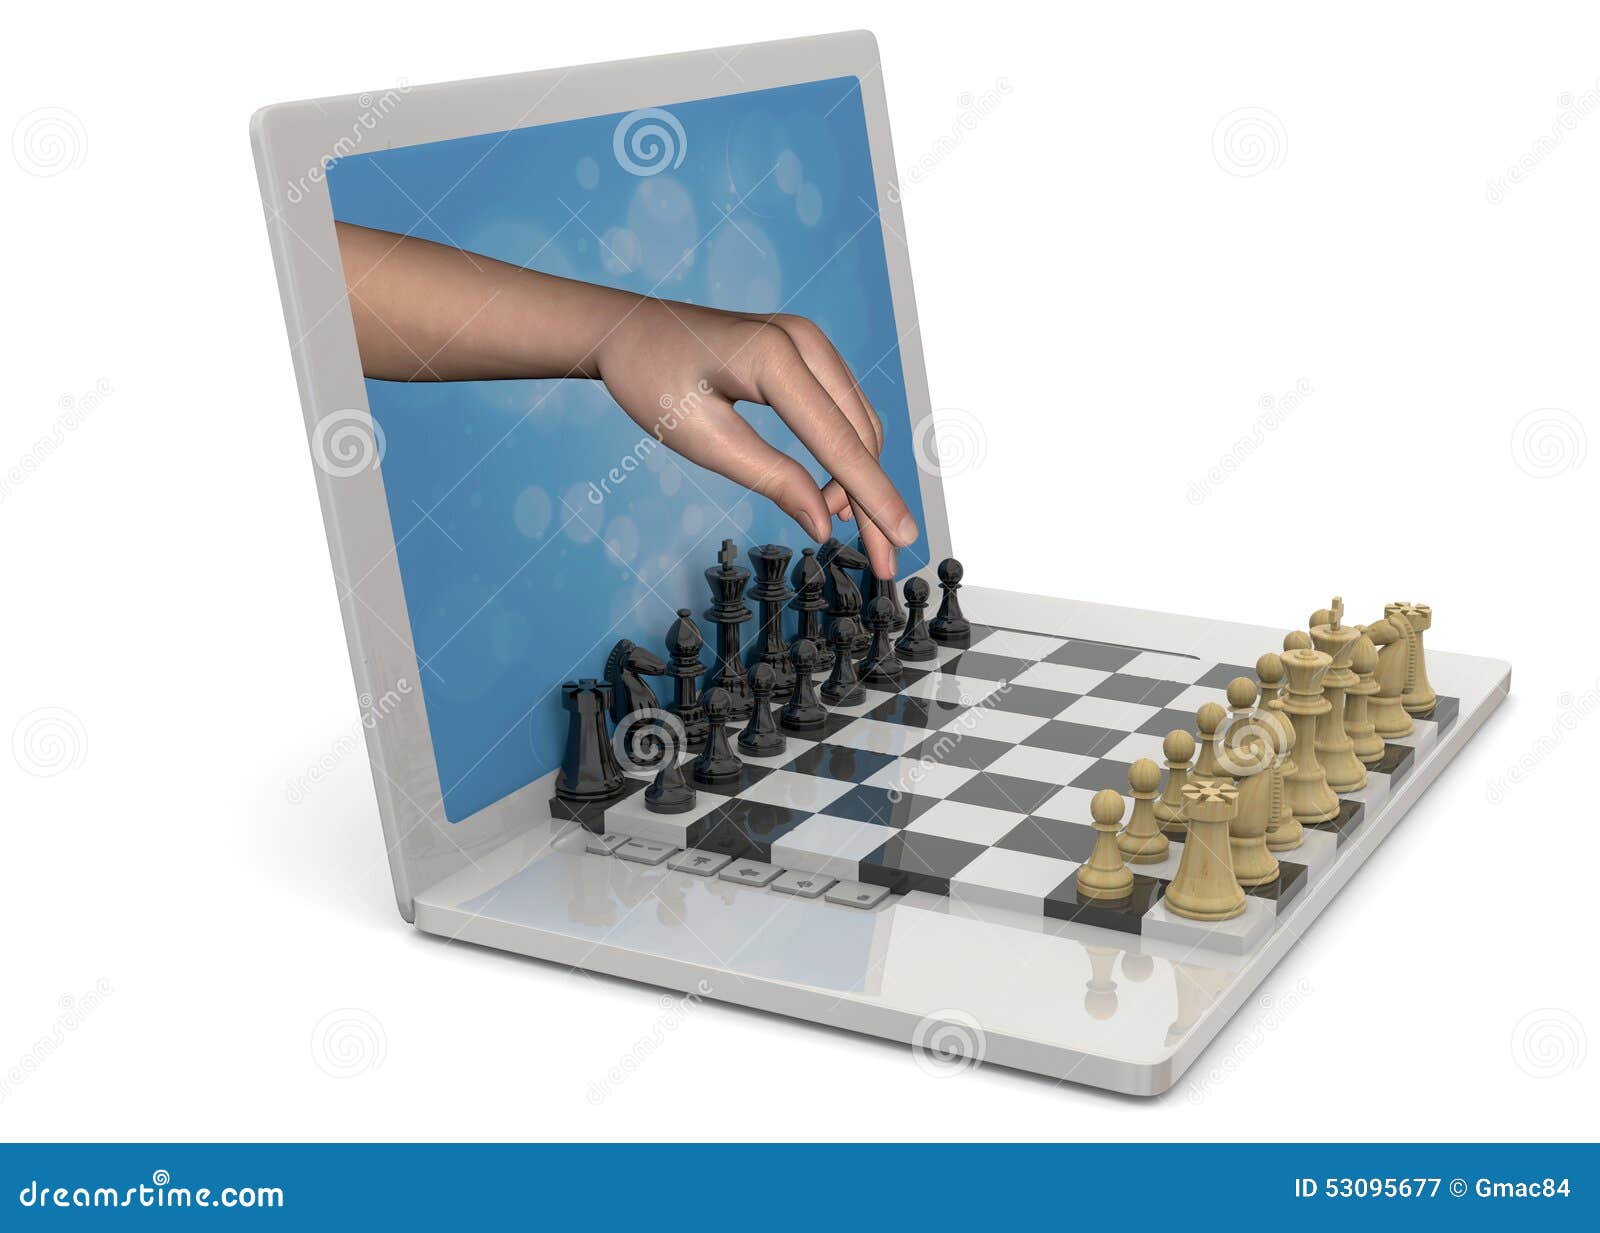 Play Chess free online against computer